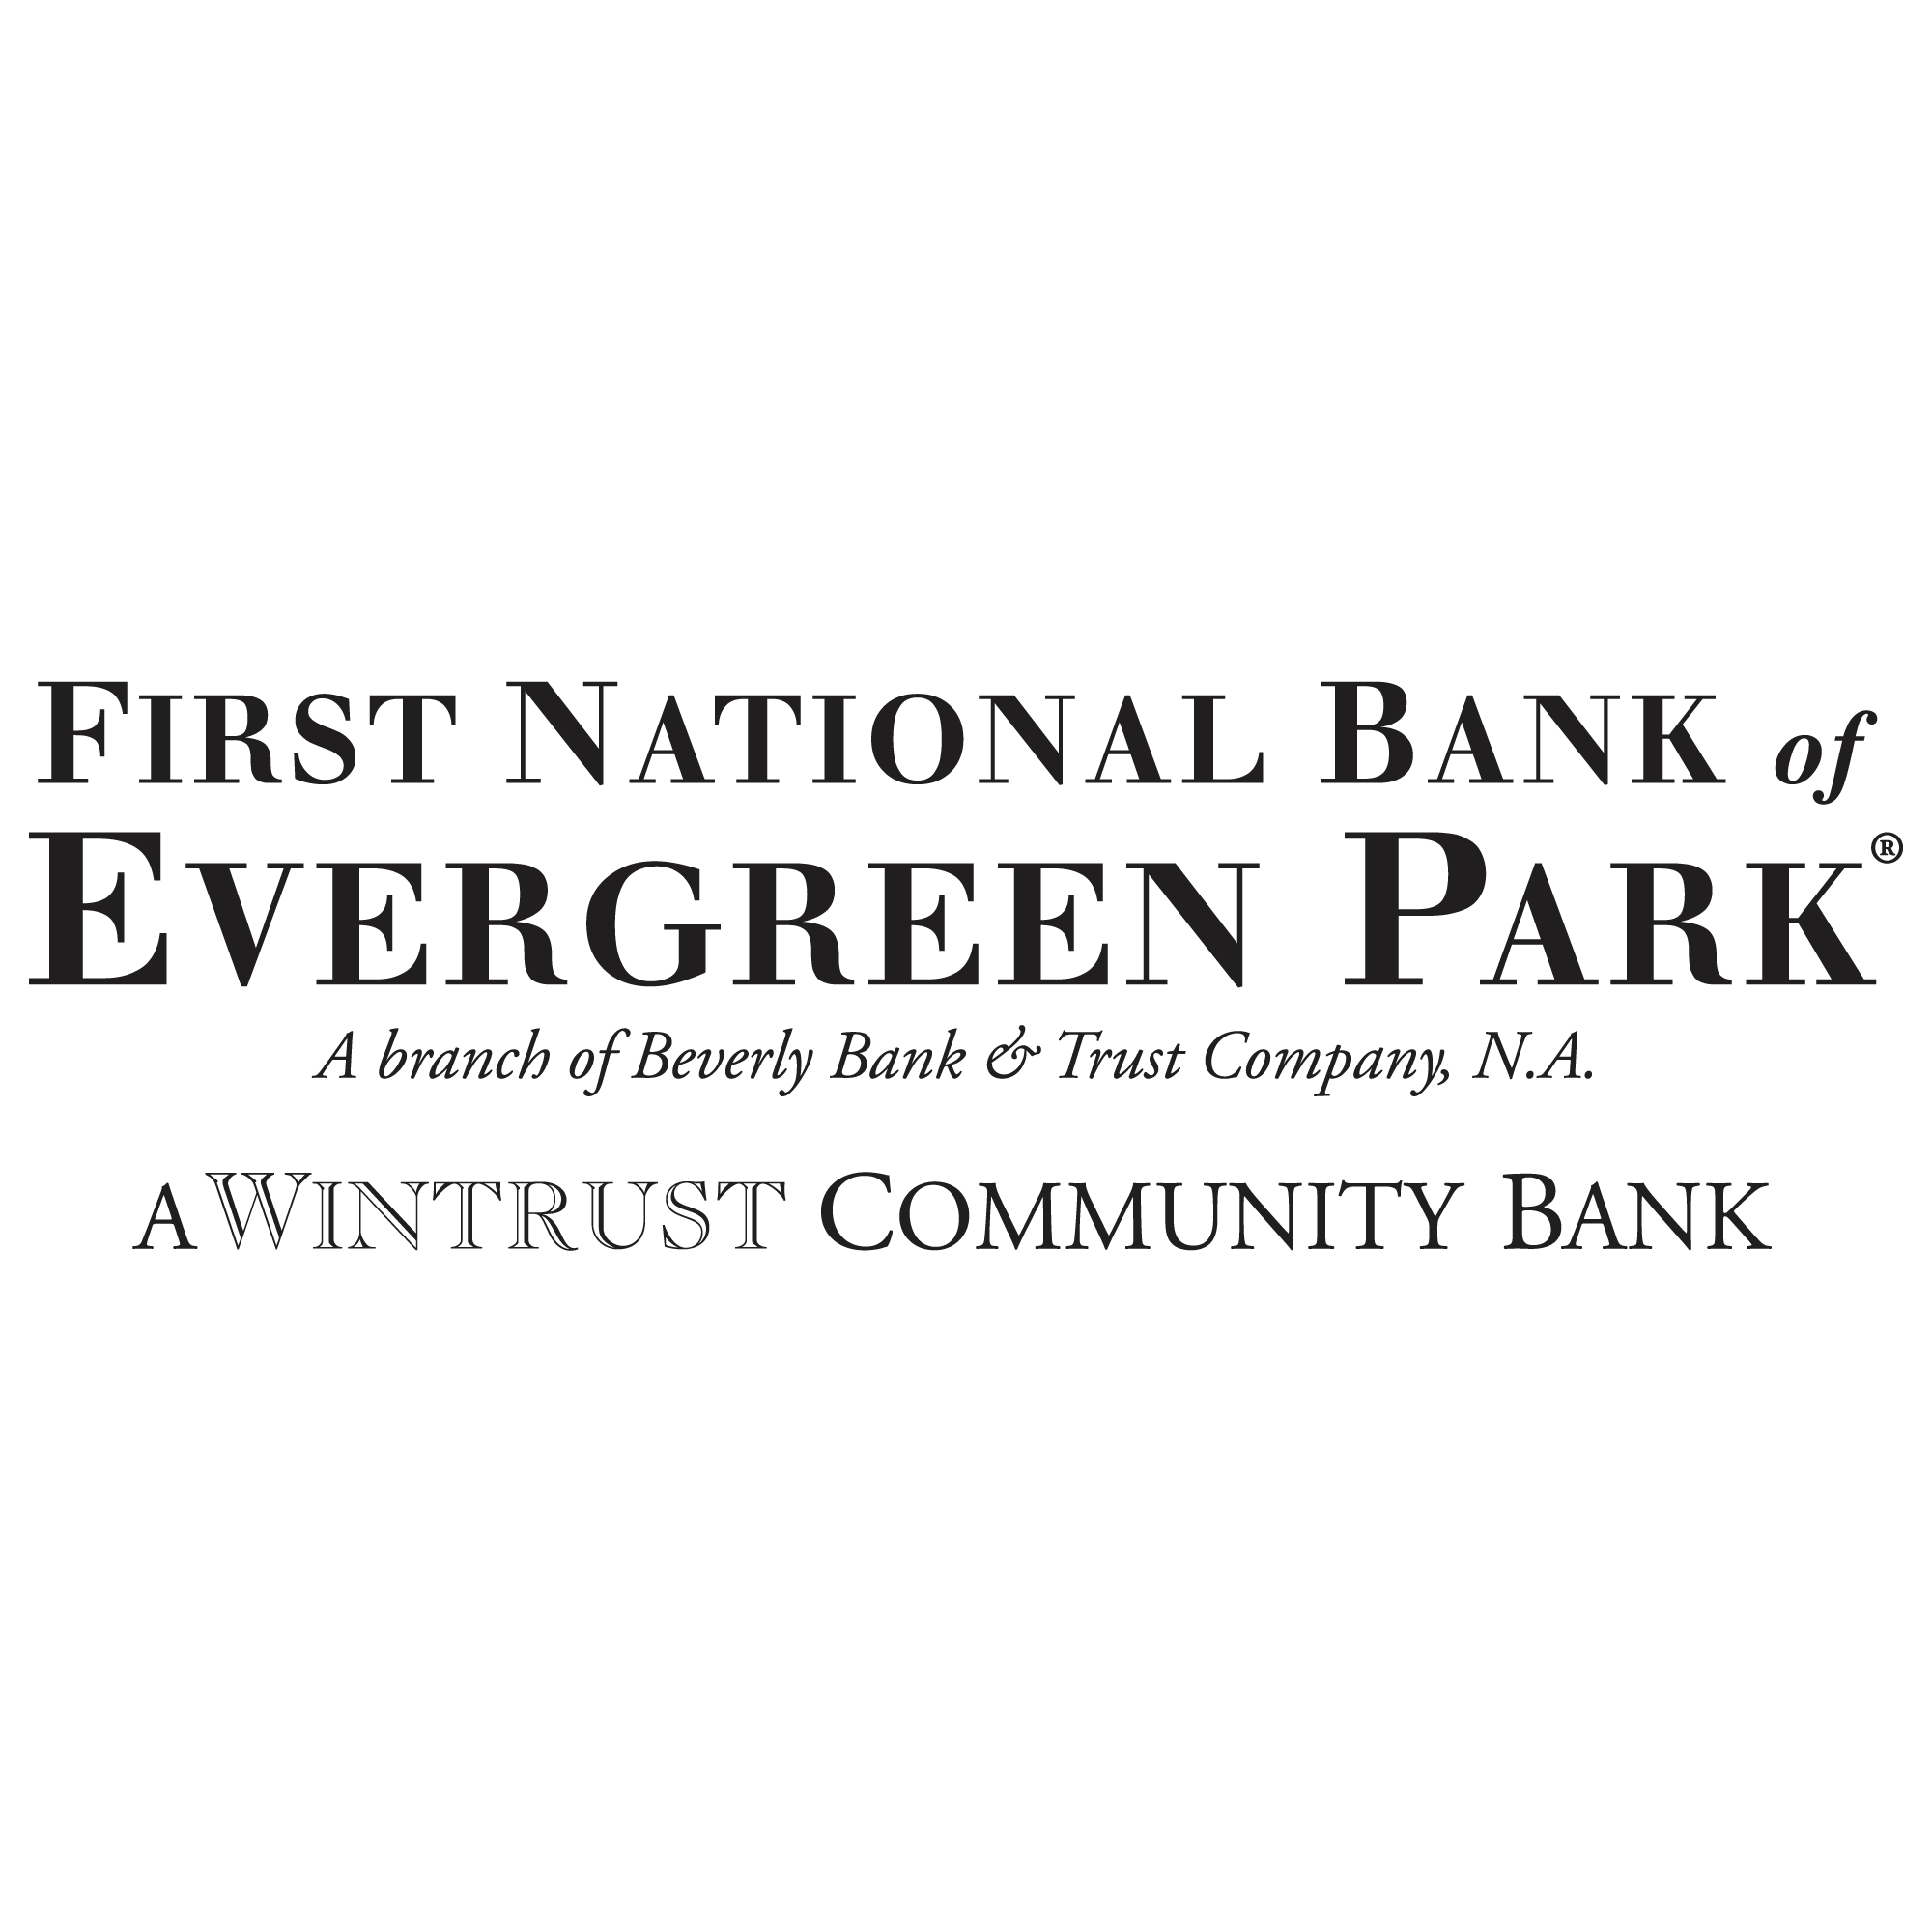 First National Bank of Evergreen Park